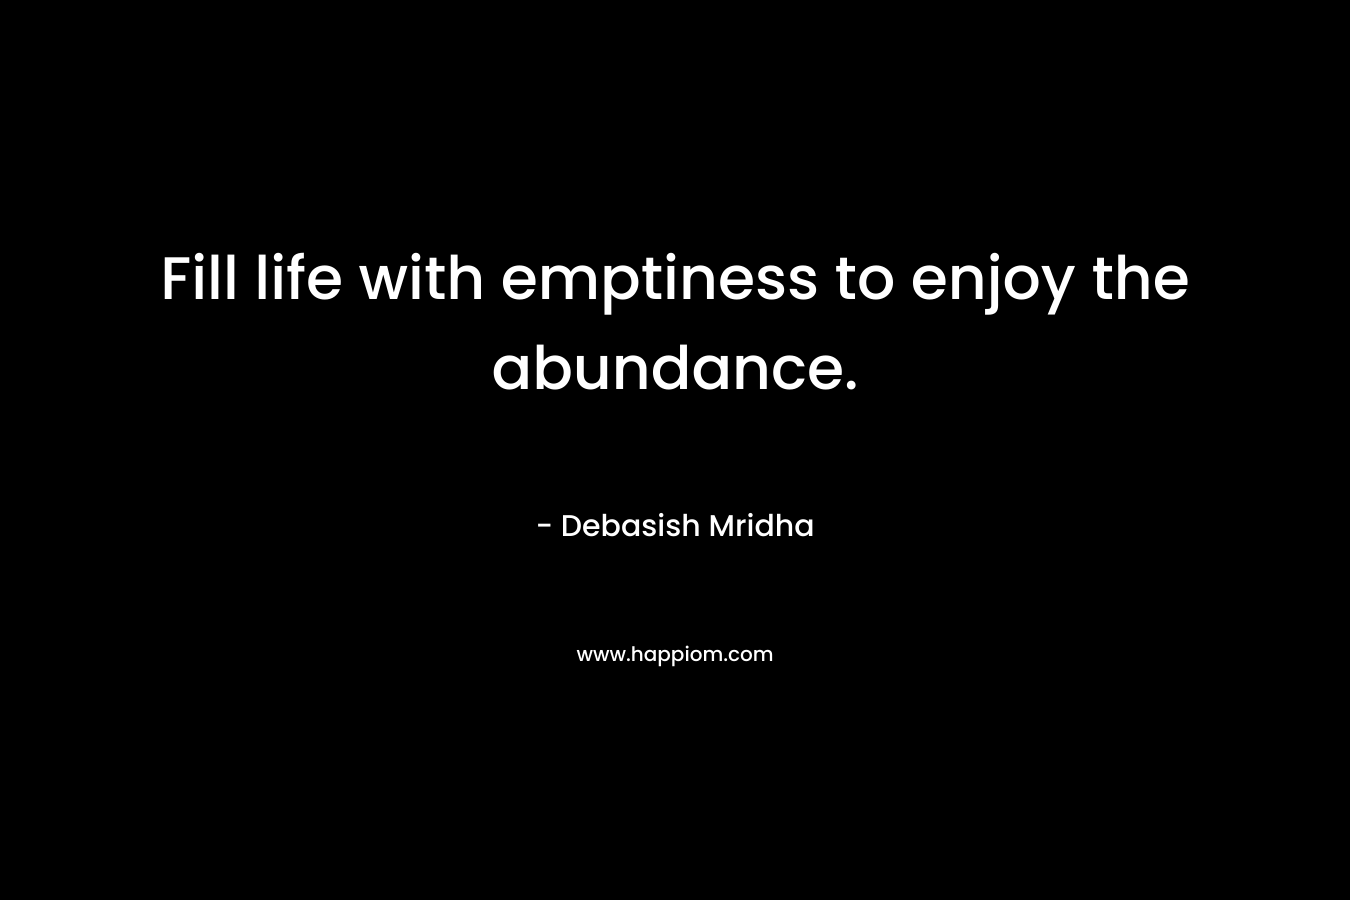 Fill life with emptiness to enjoy the abundance.